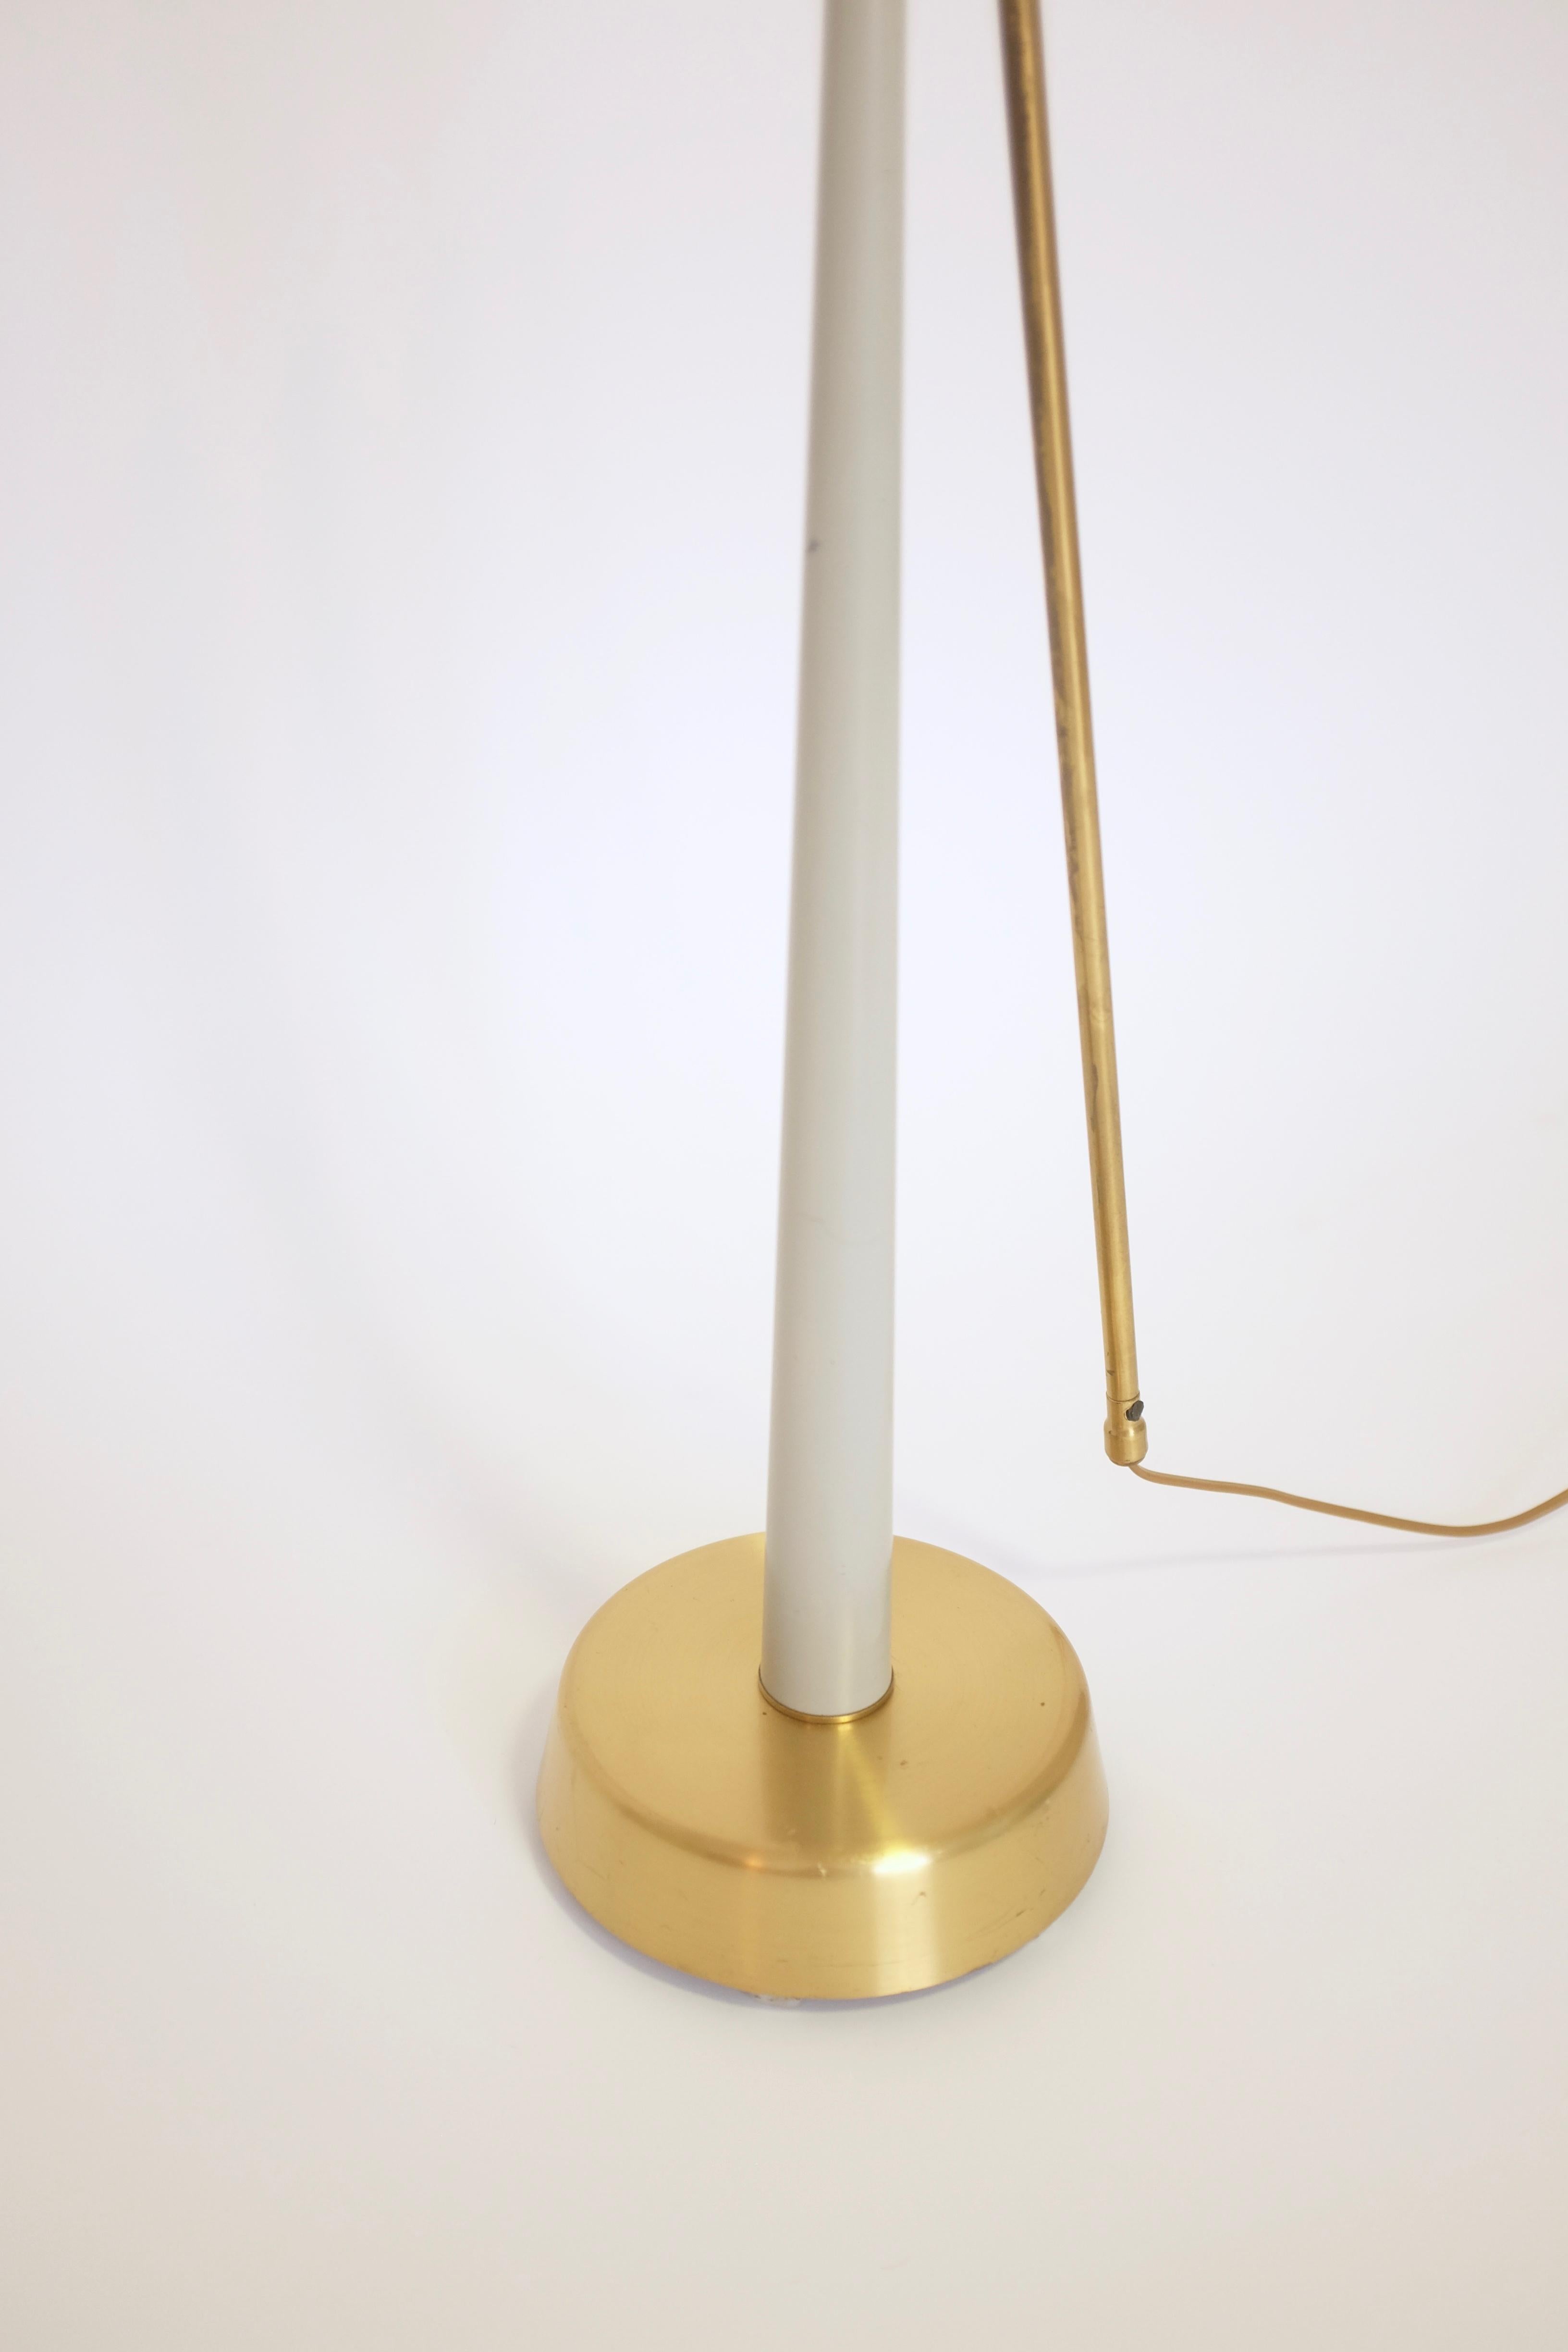 1940's Floor Lamp Model 541 by Hans Bergström for Ateljé Lyktan In Good Condition For Sale In Brooklyn, NY